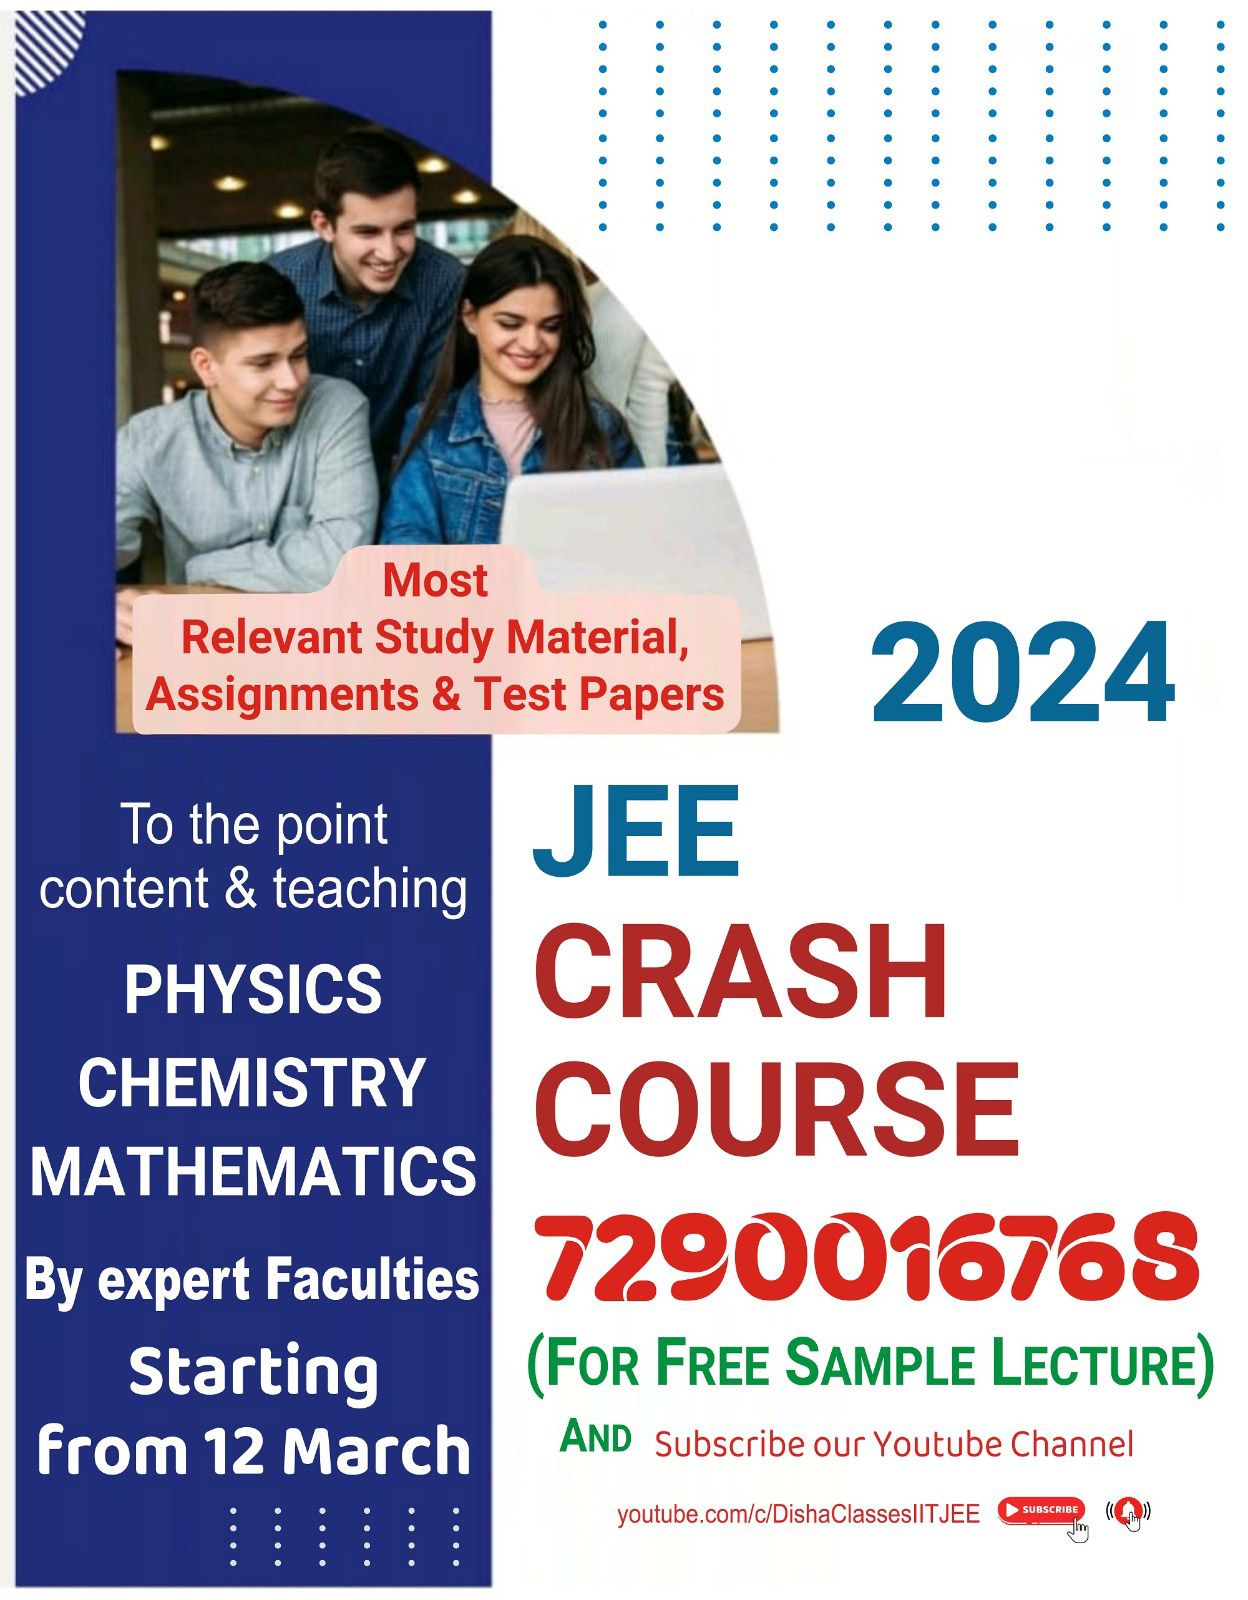 Join Now Crash Course 2024